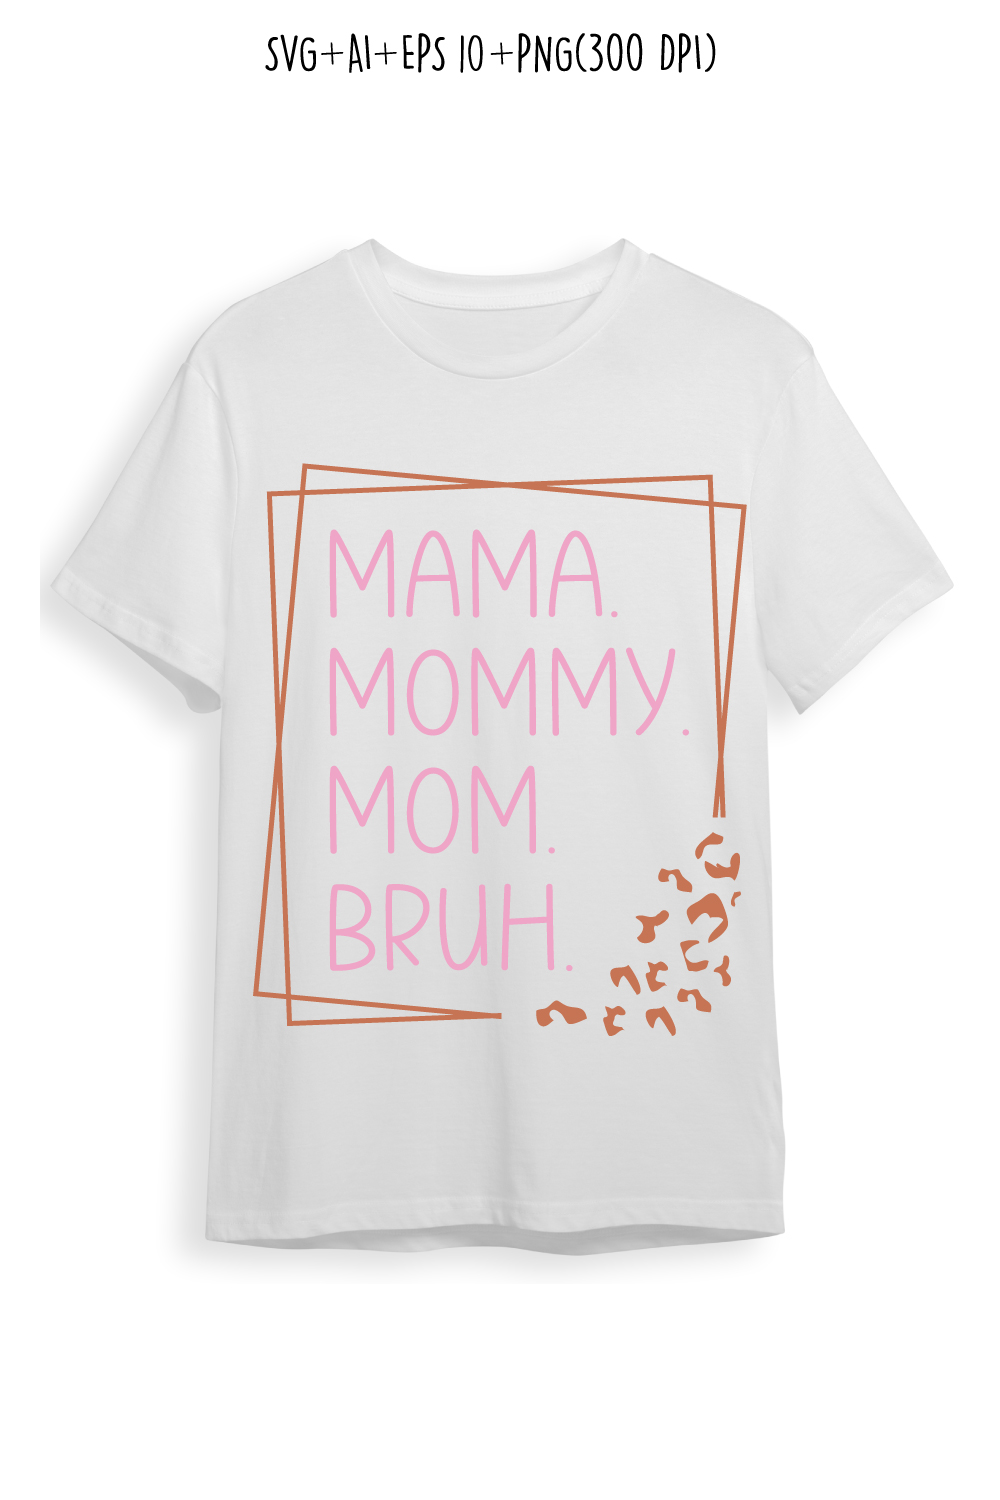 Mama Mommy Mom Bruh mothers day t-shirt design, mom quotes, mothers day quotes for t-shirts, cards, frame artwork, phone cases, bags, mugs, stickers, tumblers, print, etc pinterest preview image.